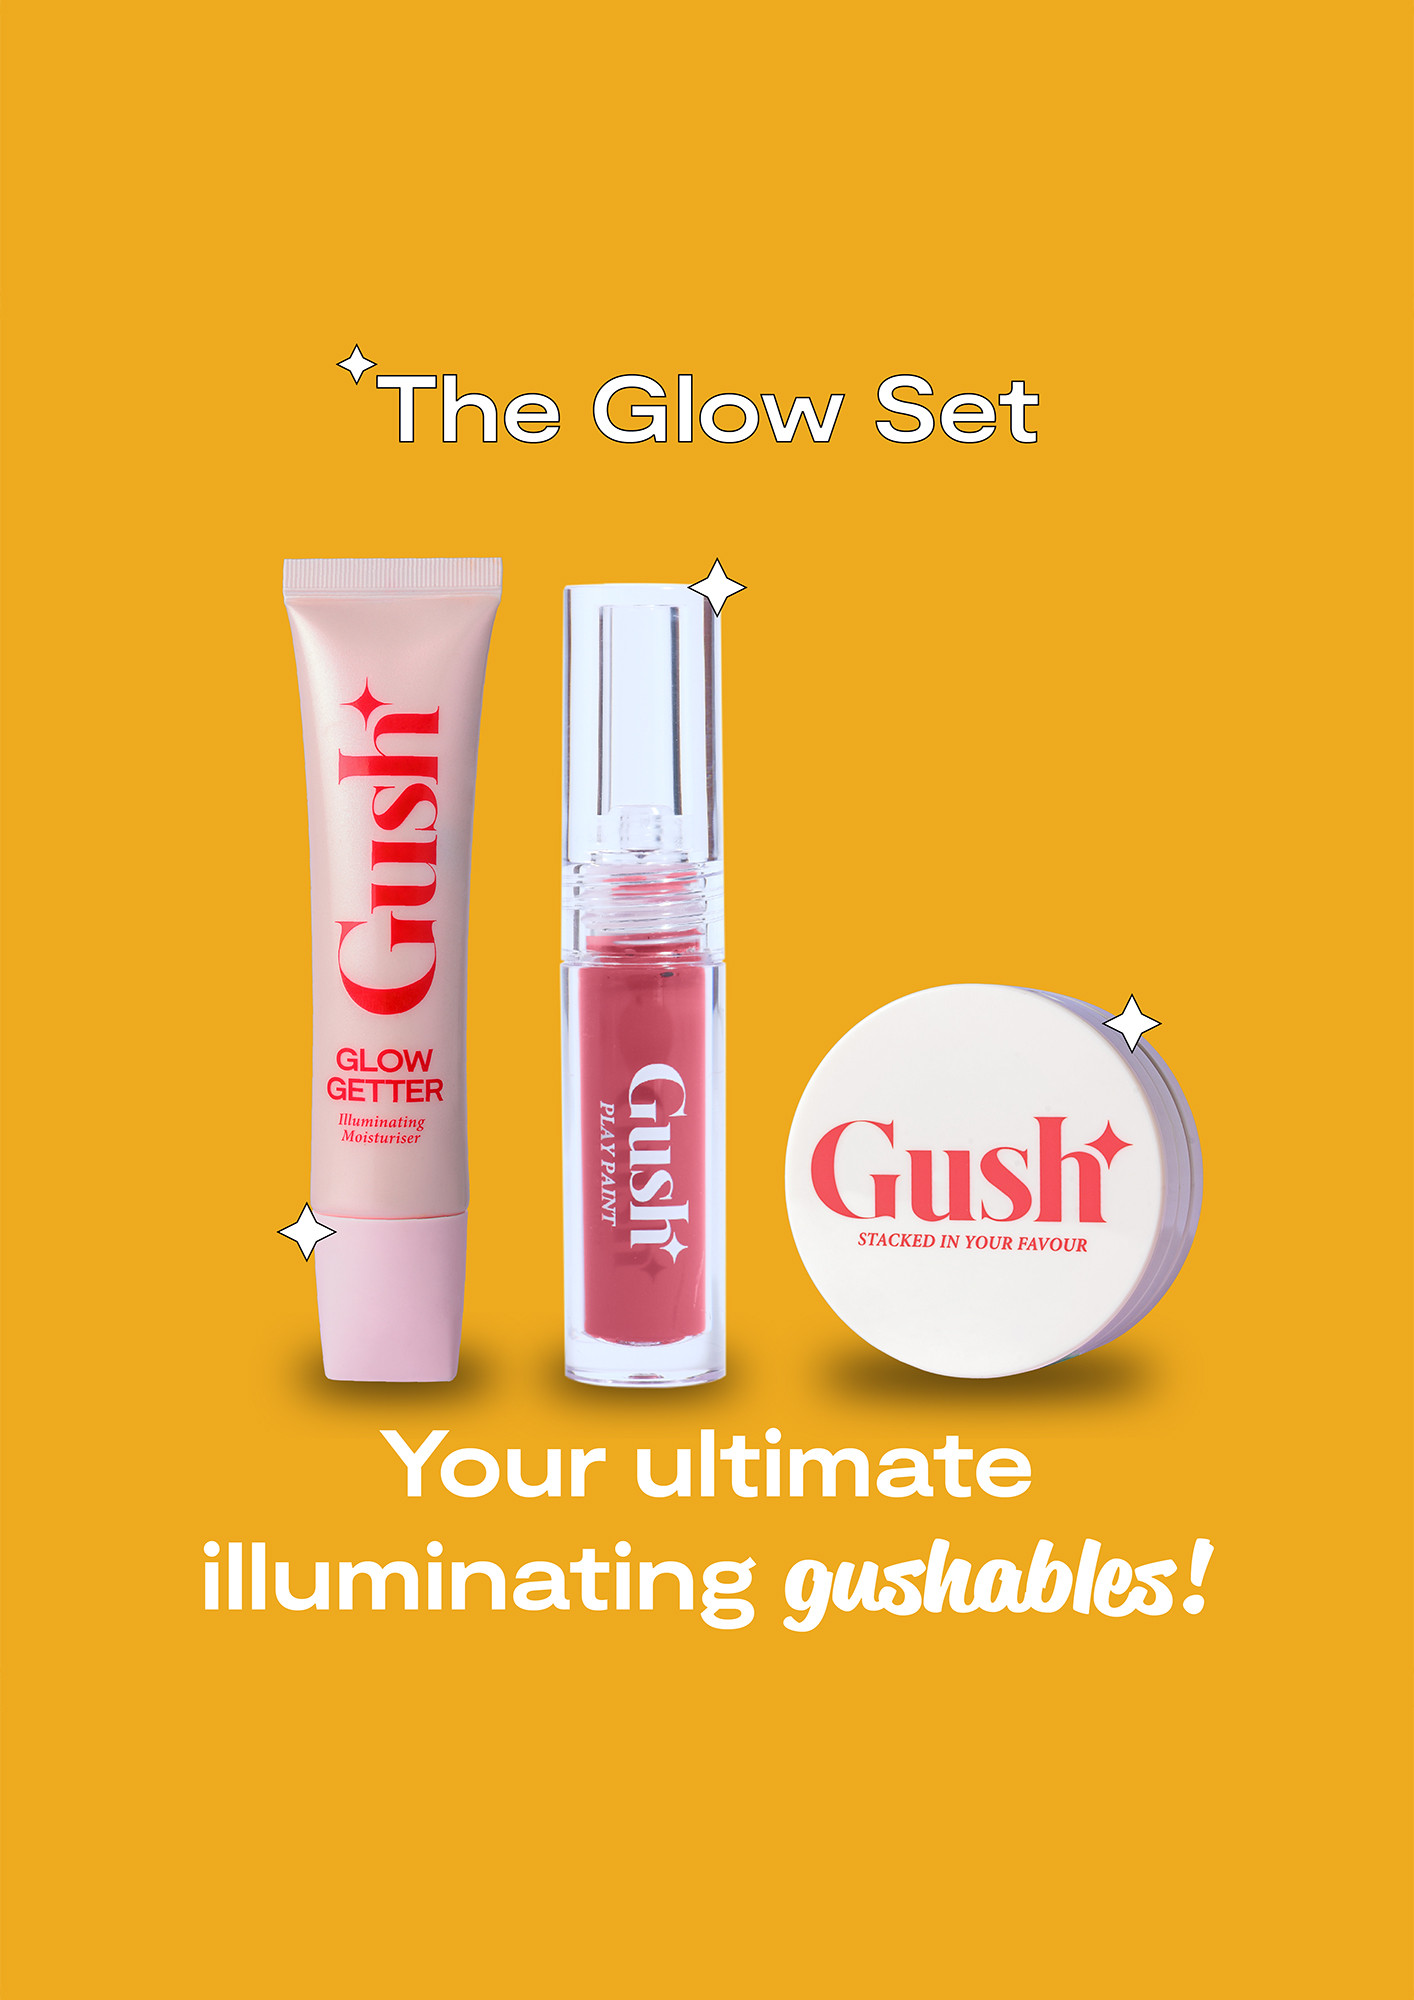 The Glow Set- My own muse &day in and day out